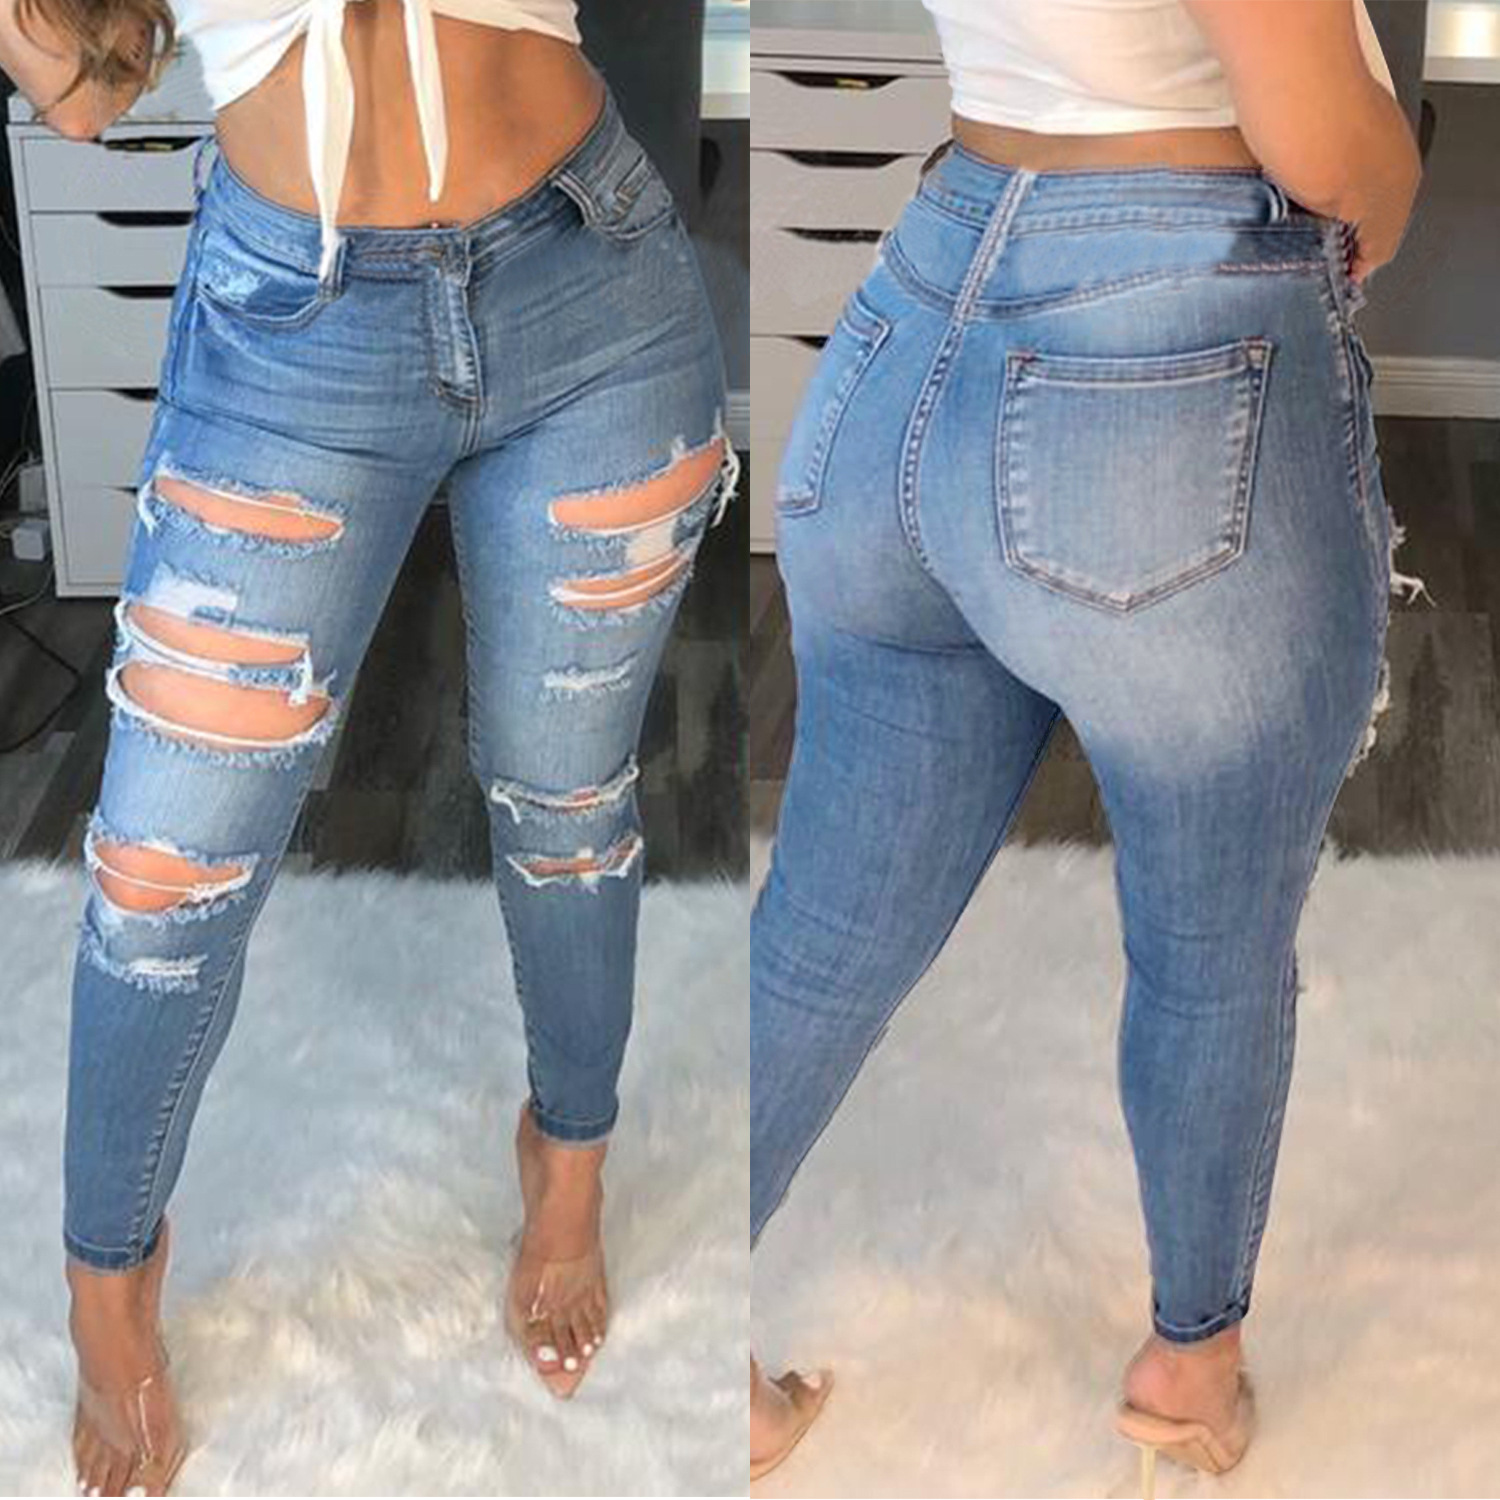 US$ 6.09 - Fashion sexy jeans with holes - www.keke-lover.com